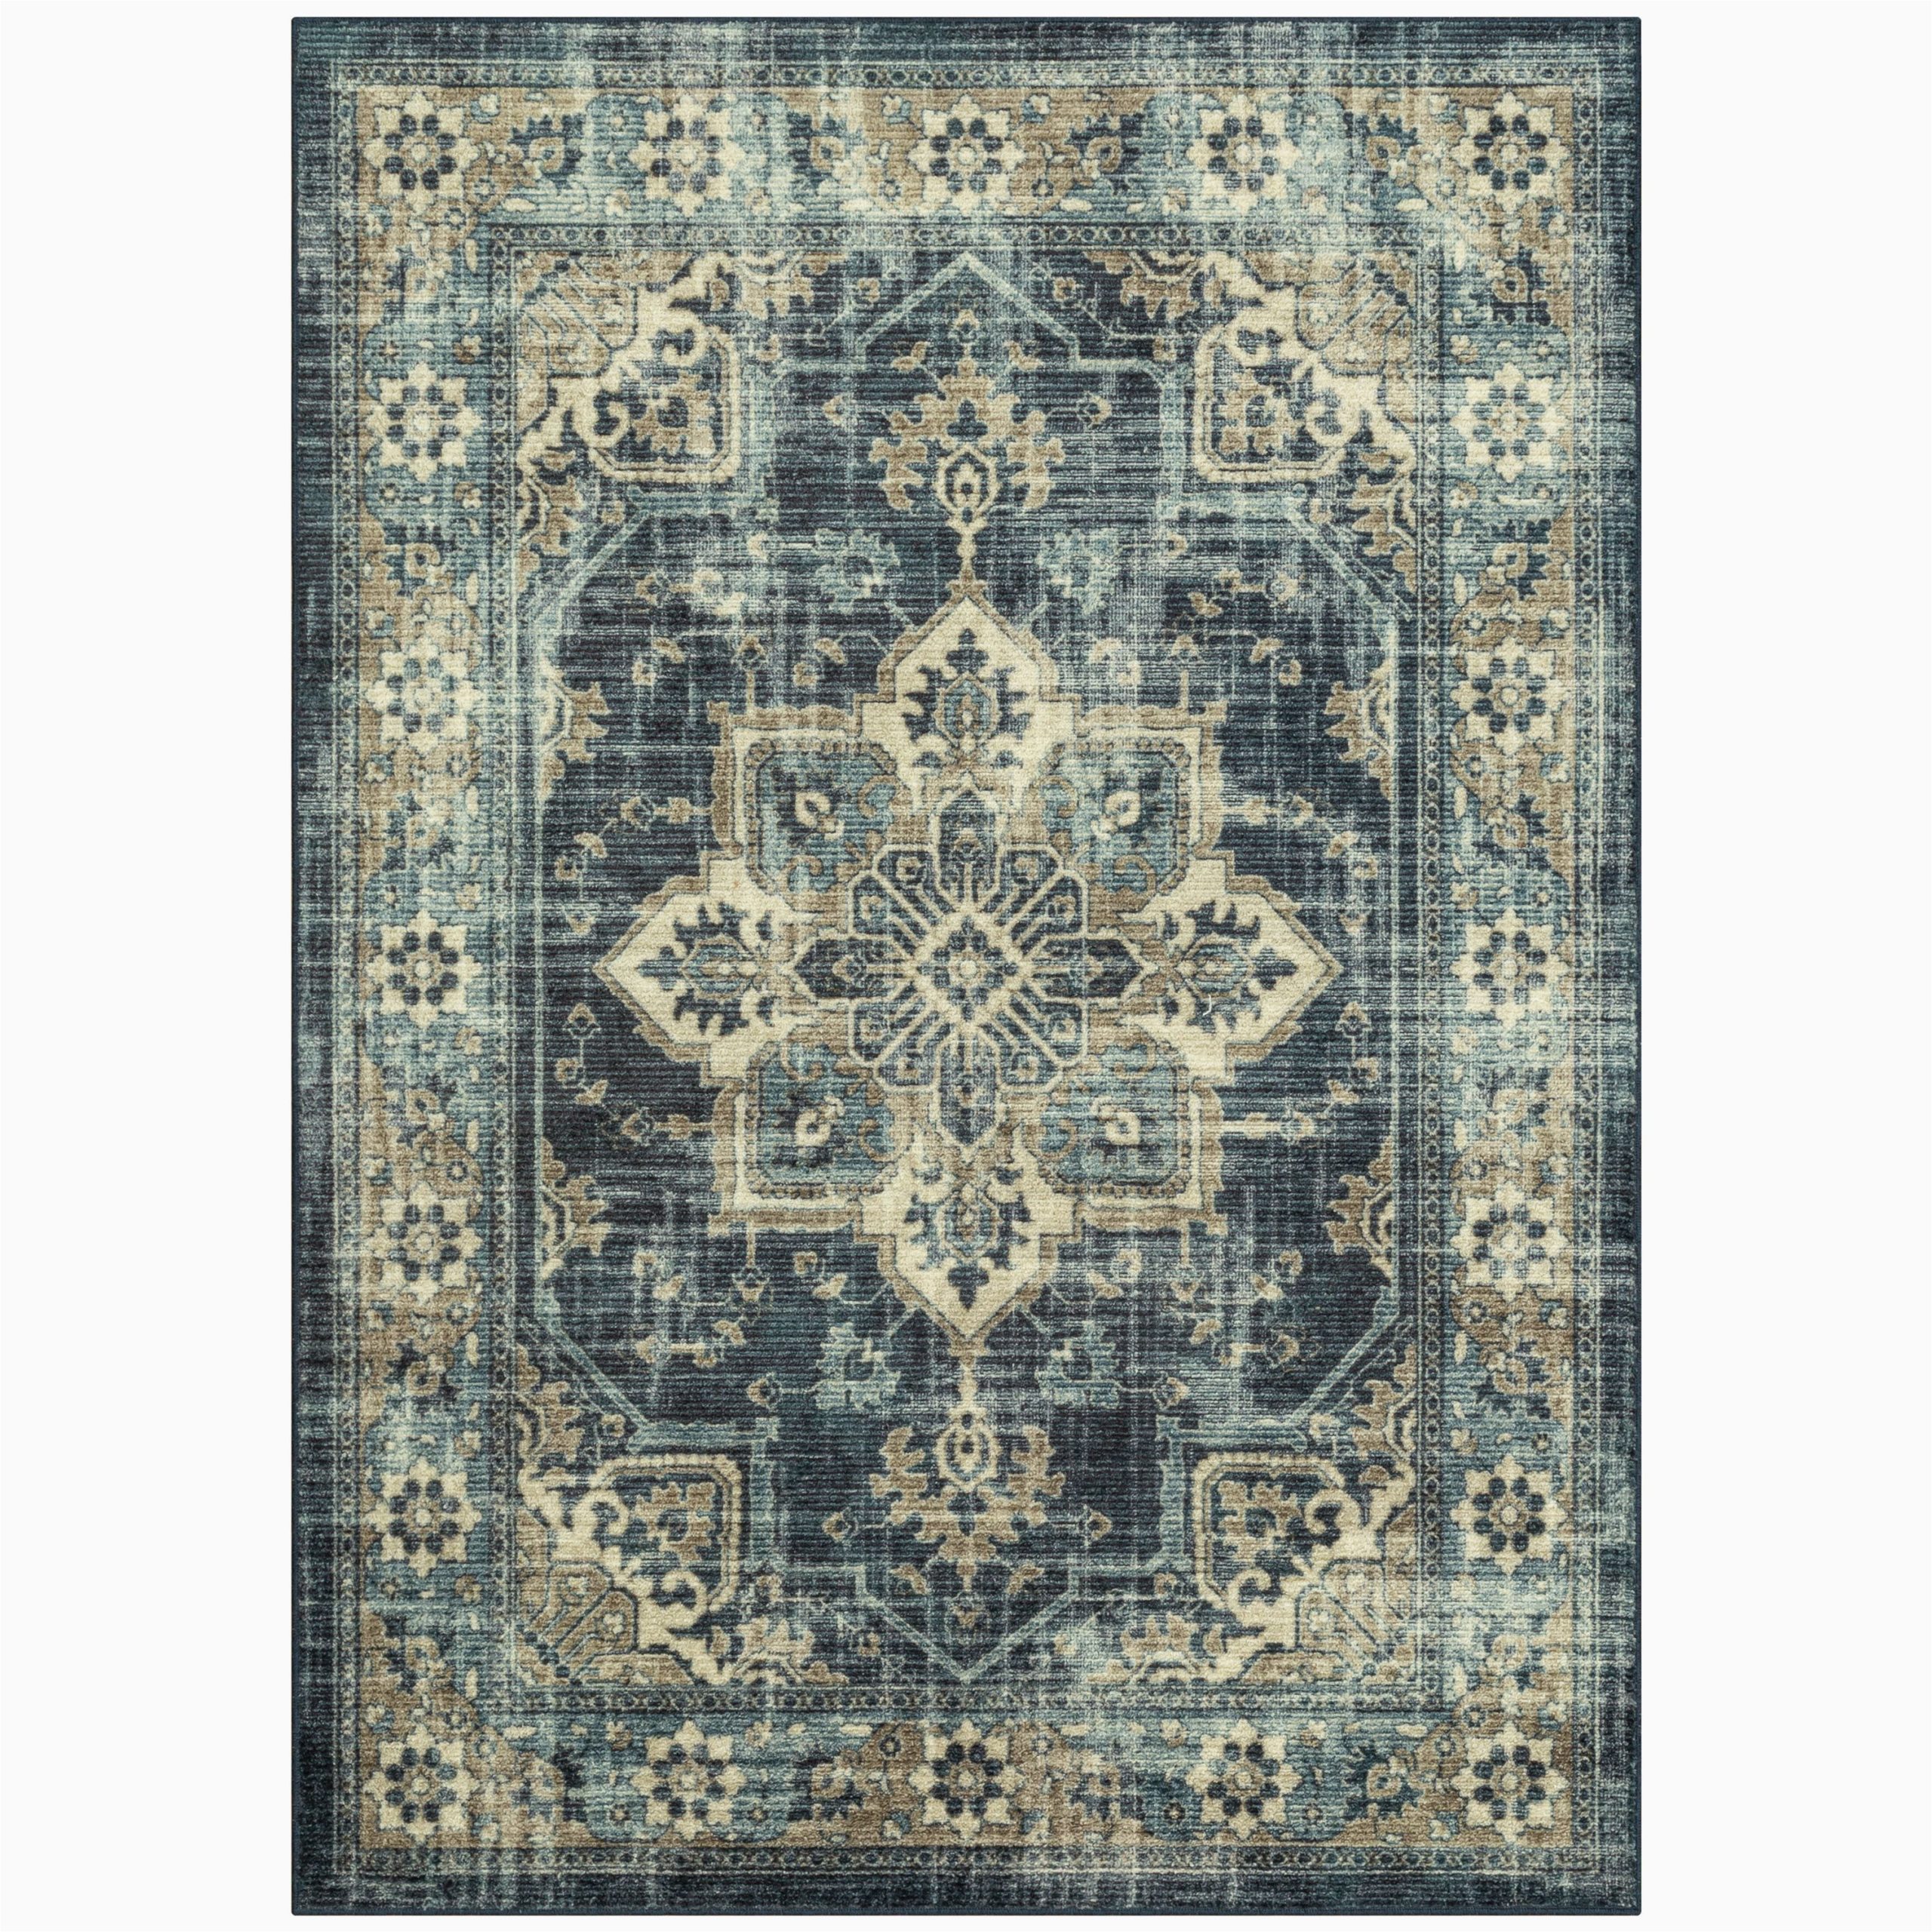 Maples Rugs Bed Bath and Beyond Maples Rugs Traditional Medallion Border Blue area Rug, 7’x10′